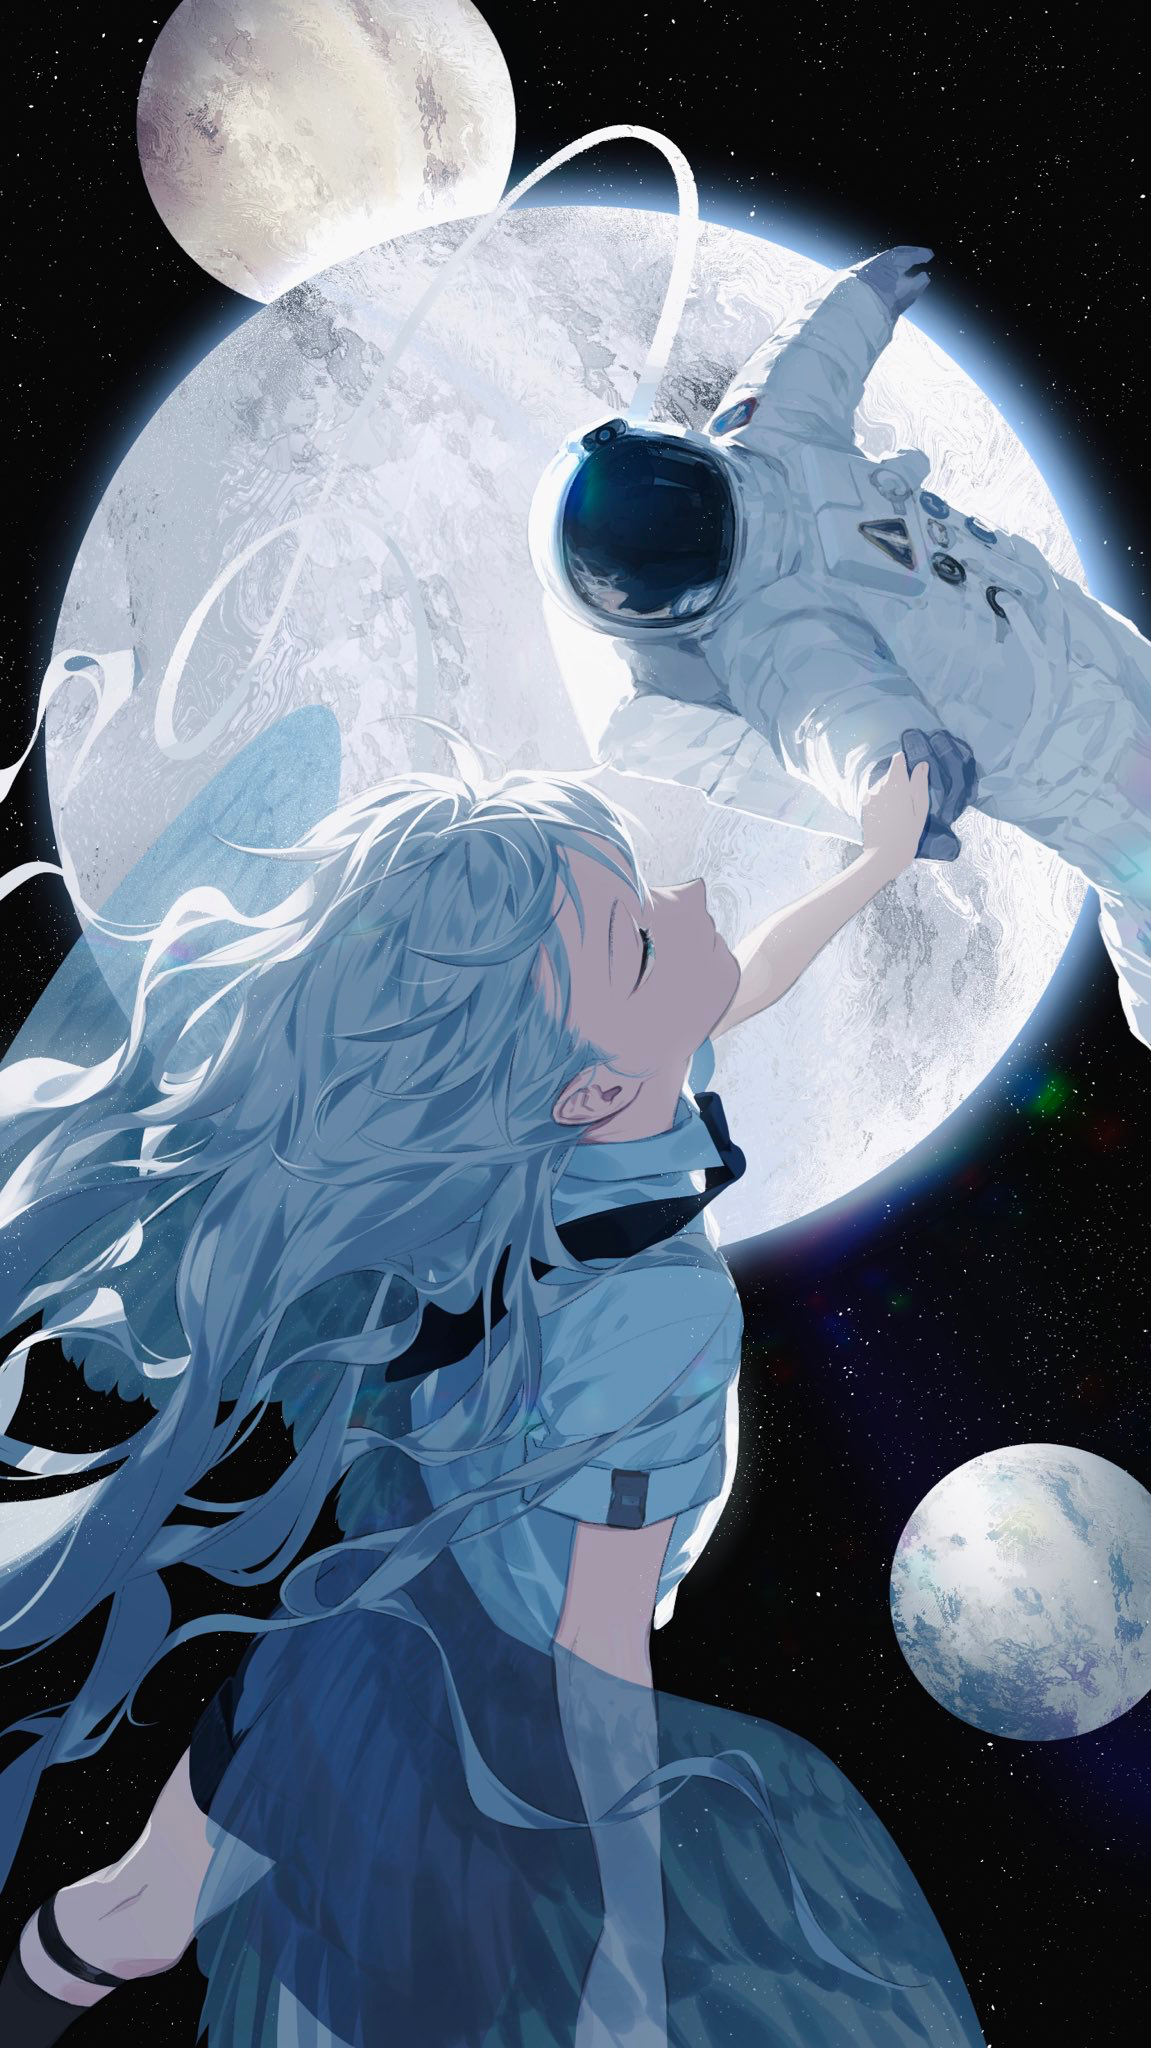 Anime Girl with Wings and Astronaut Wallpaper 4K #3040g